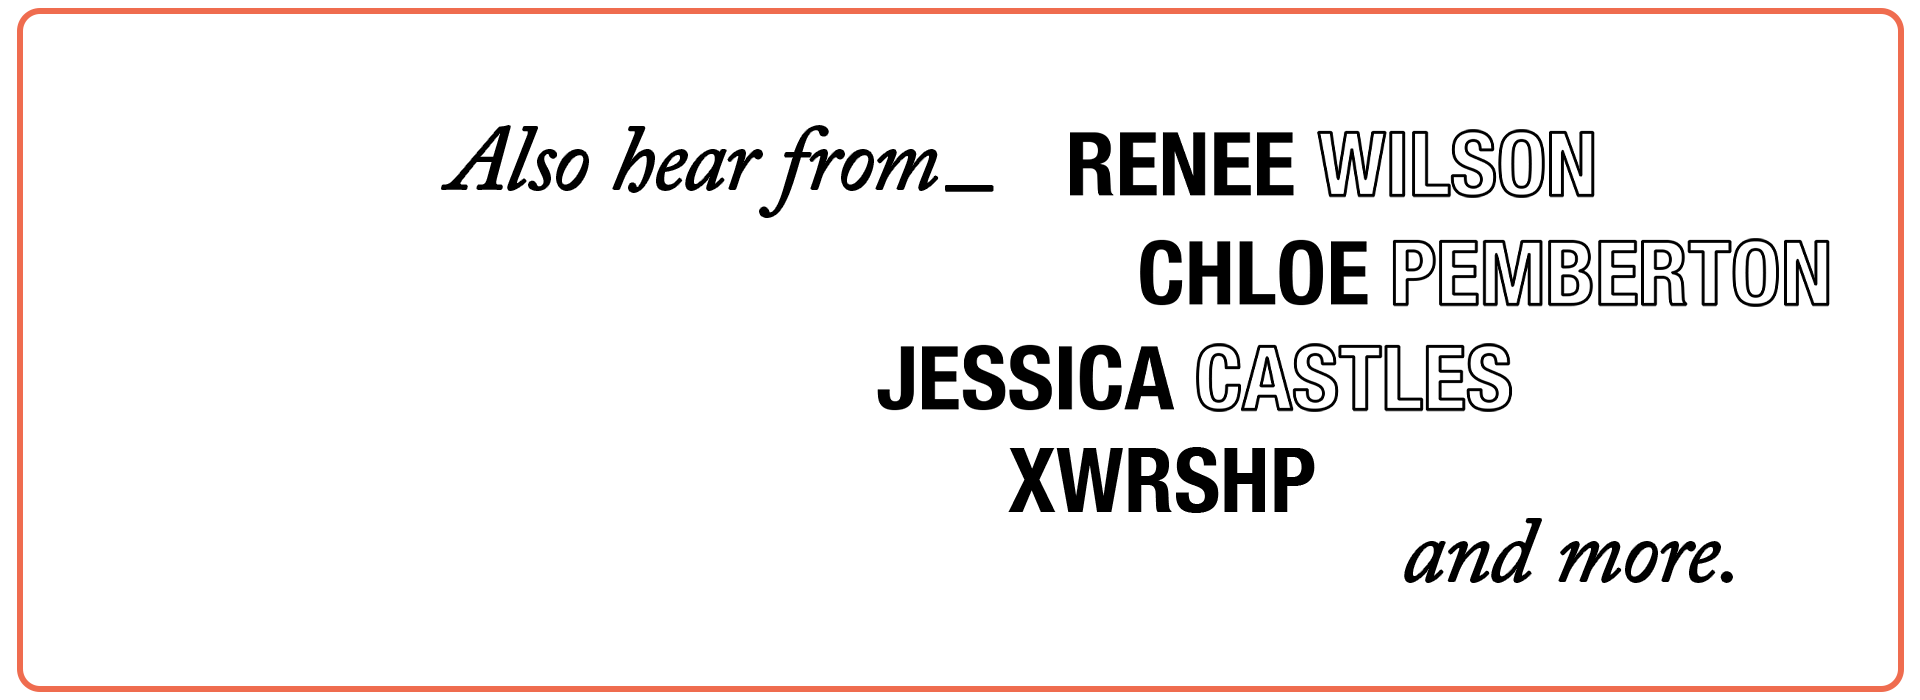  also hear from renee wilson, chloe pemberton, jessica castles, xwrshp, and more